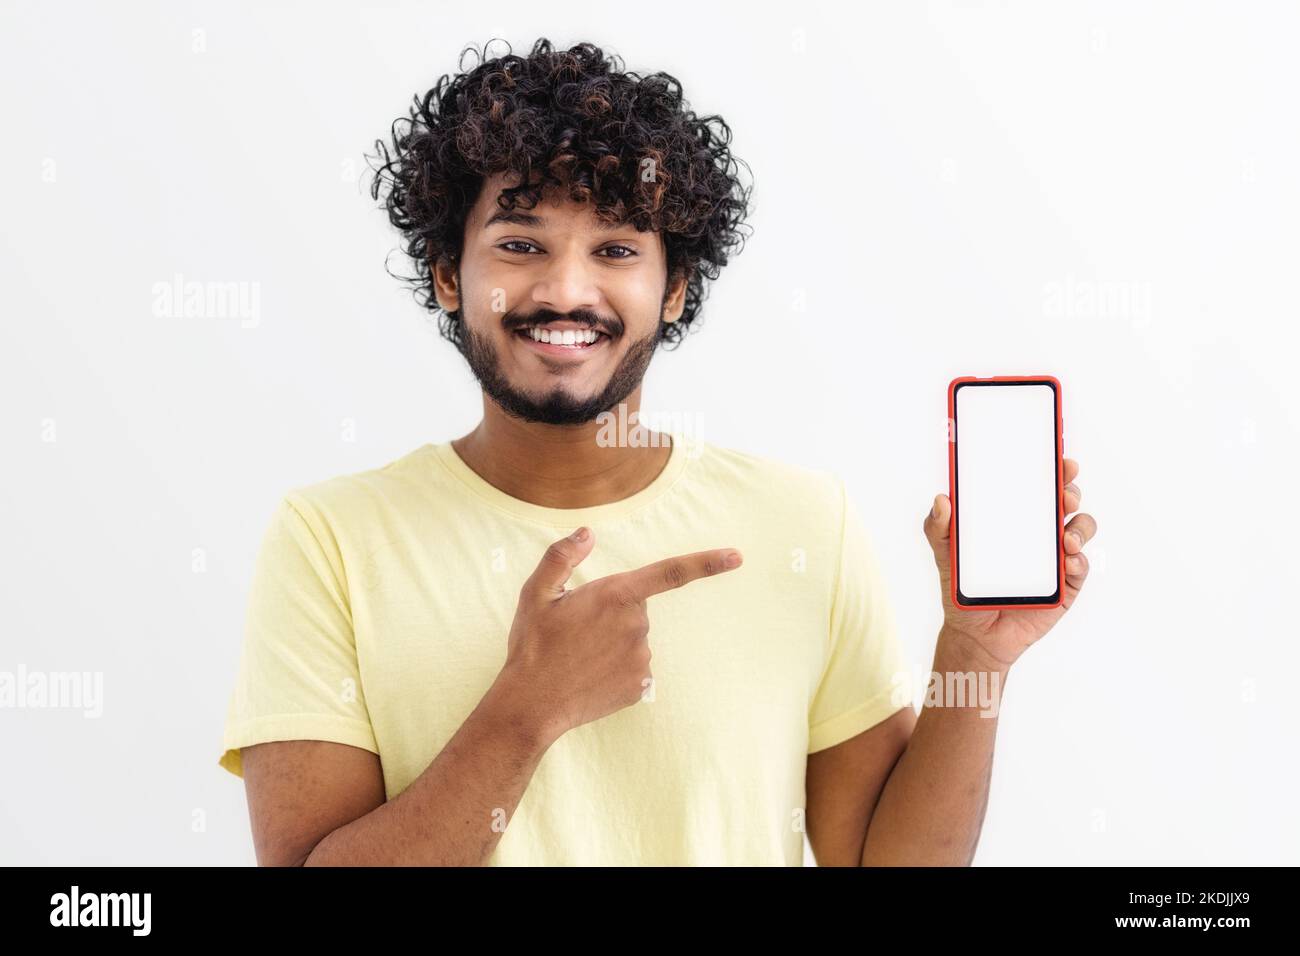 Happy Indian man student standing with mobile phone, pointing his finger at the empty screen on white background Stock Photo